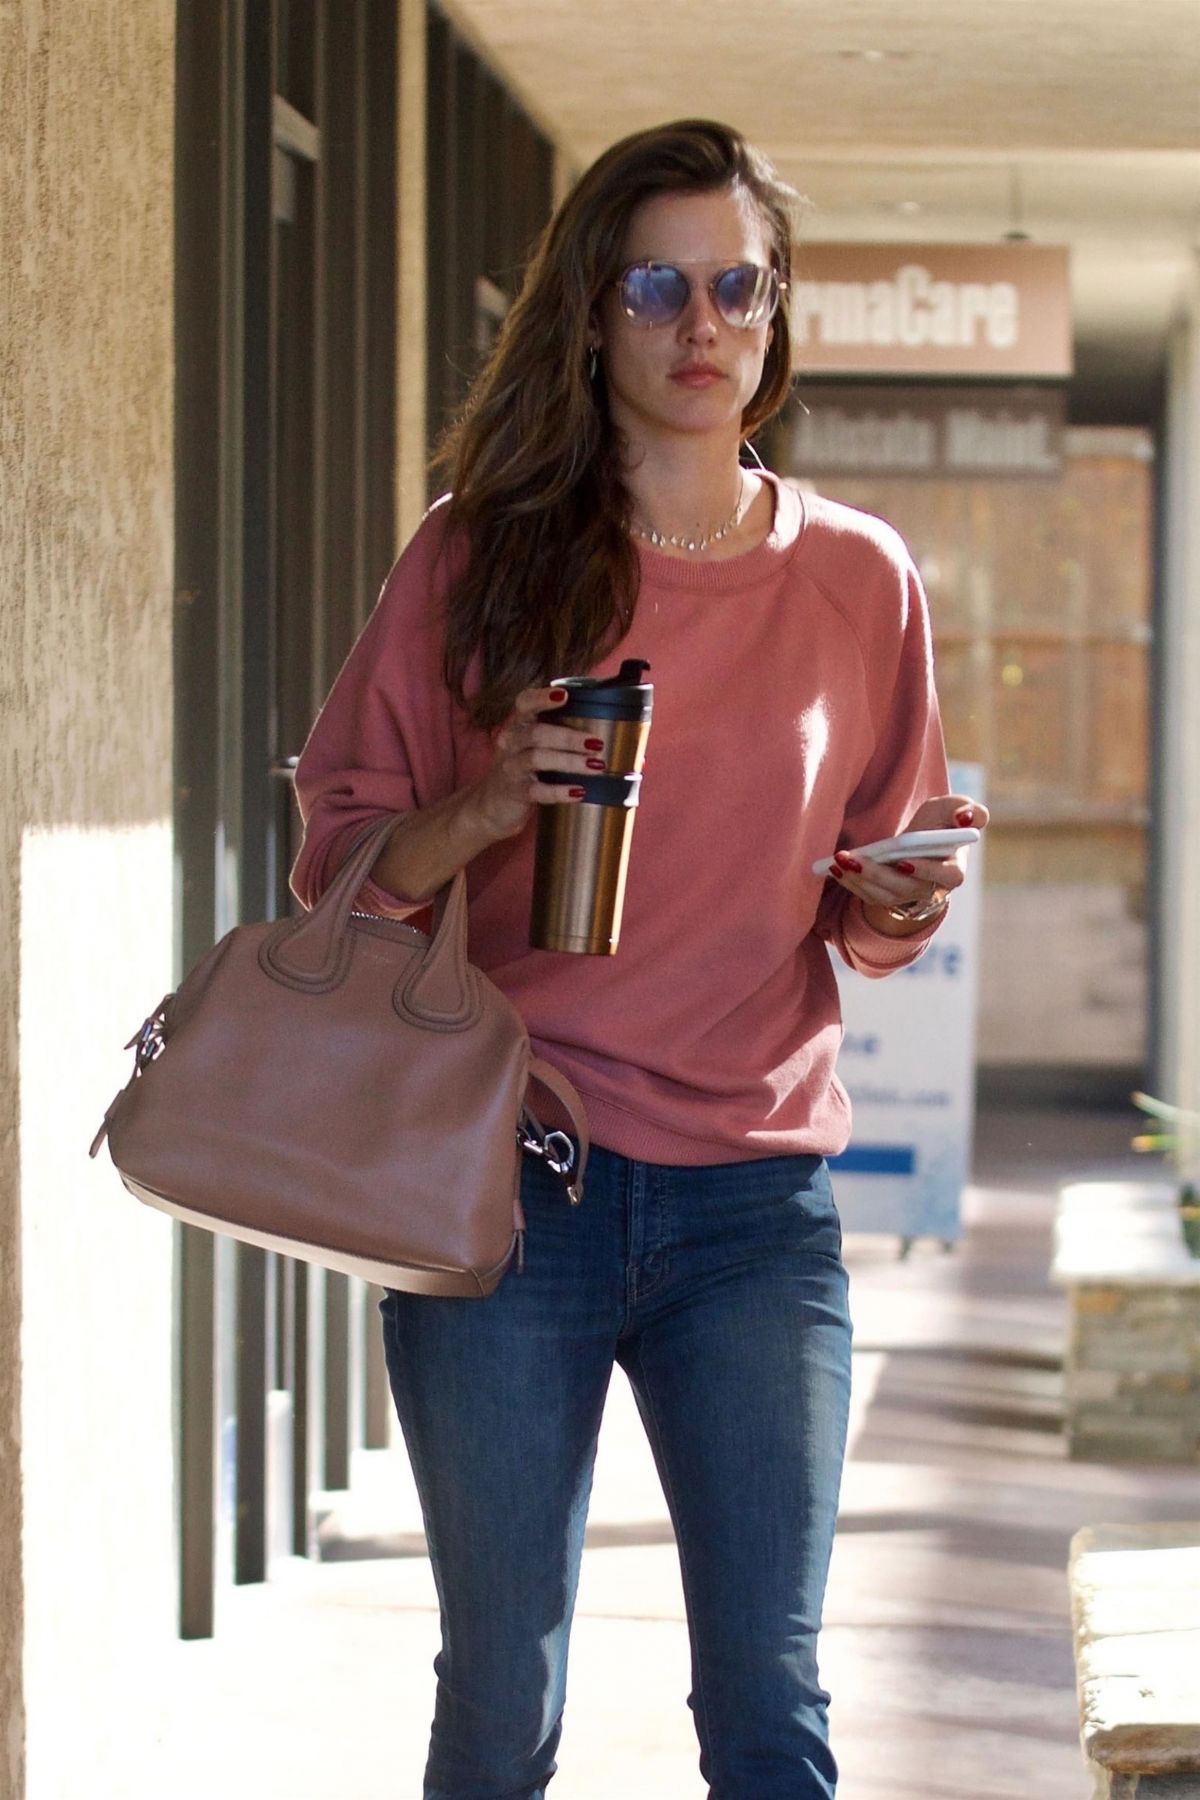 ALESSANDRA AMBROSIO at a Skin Care Center in Brentwood 11/30/2017 ...